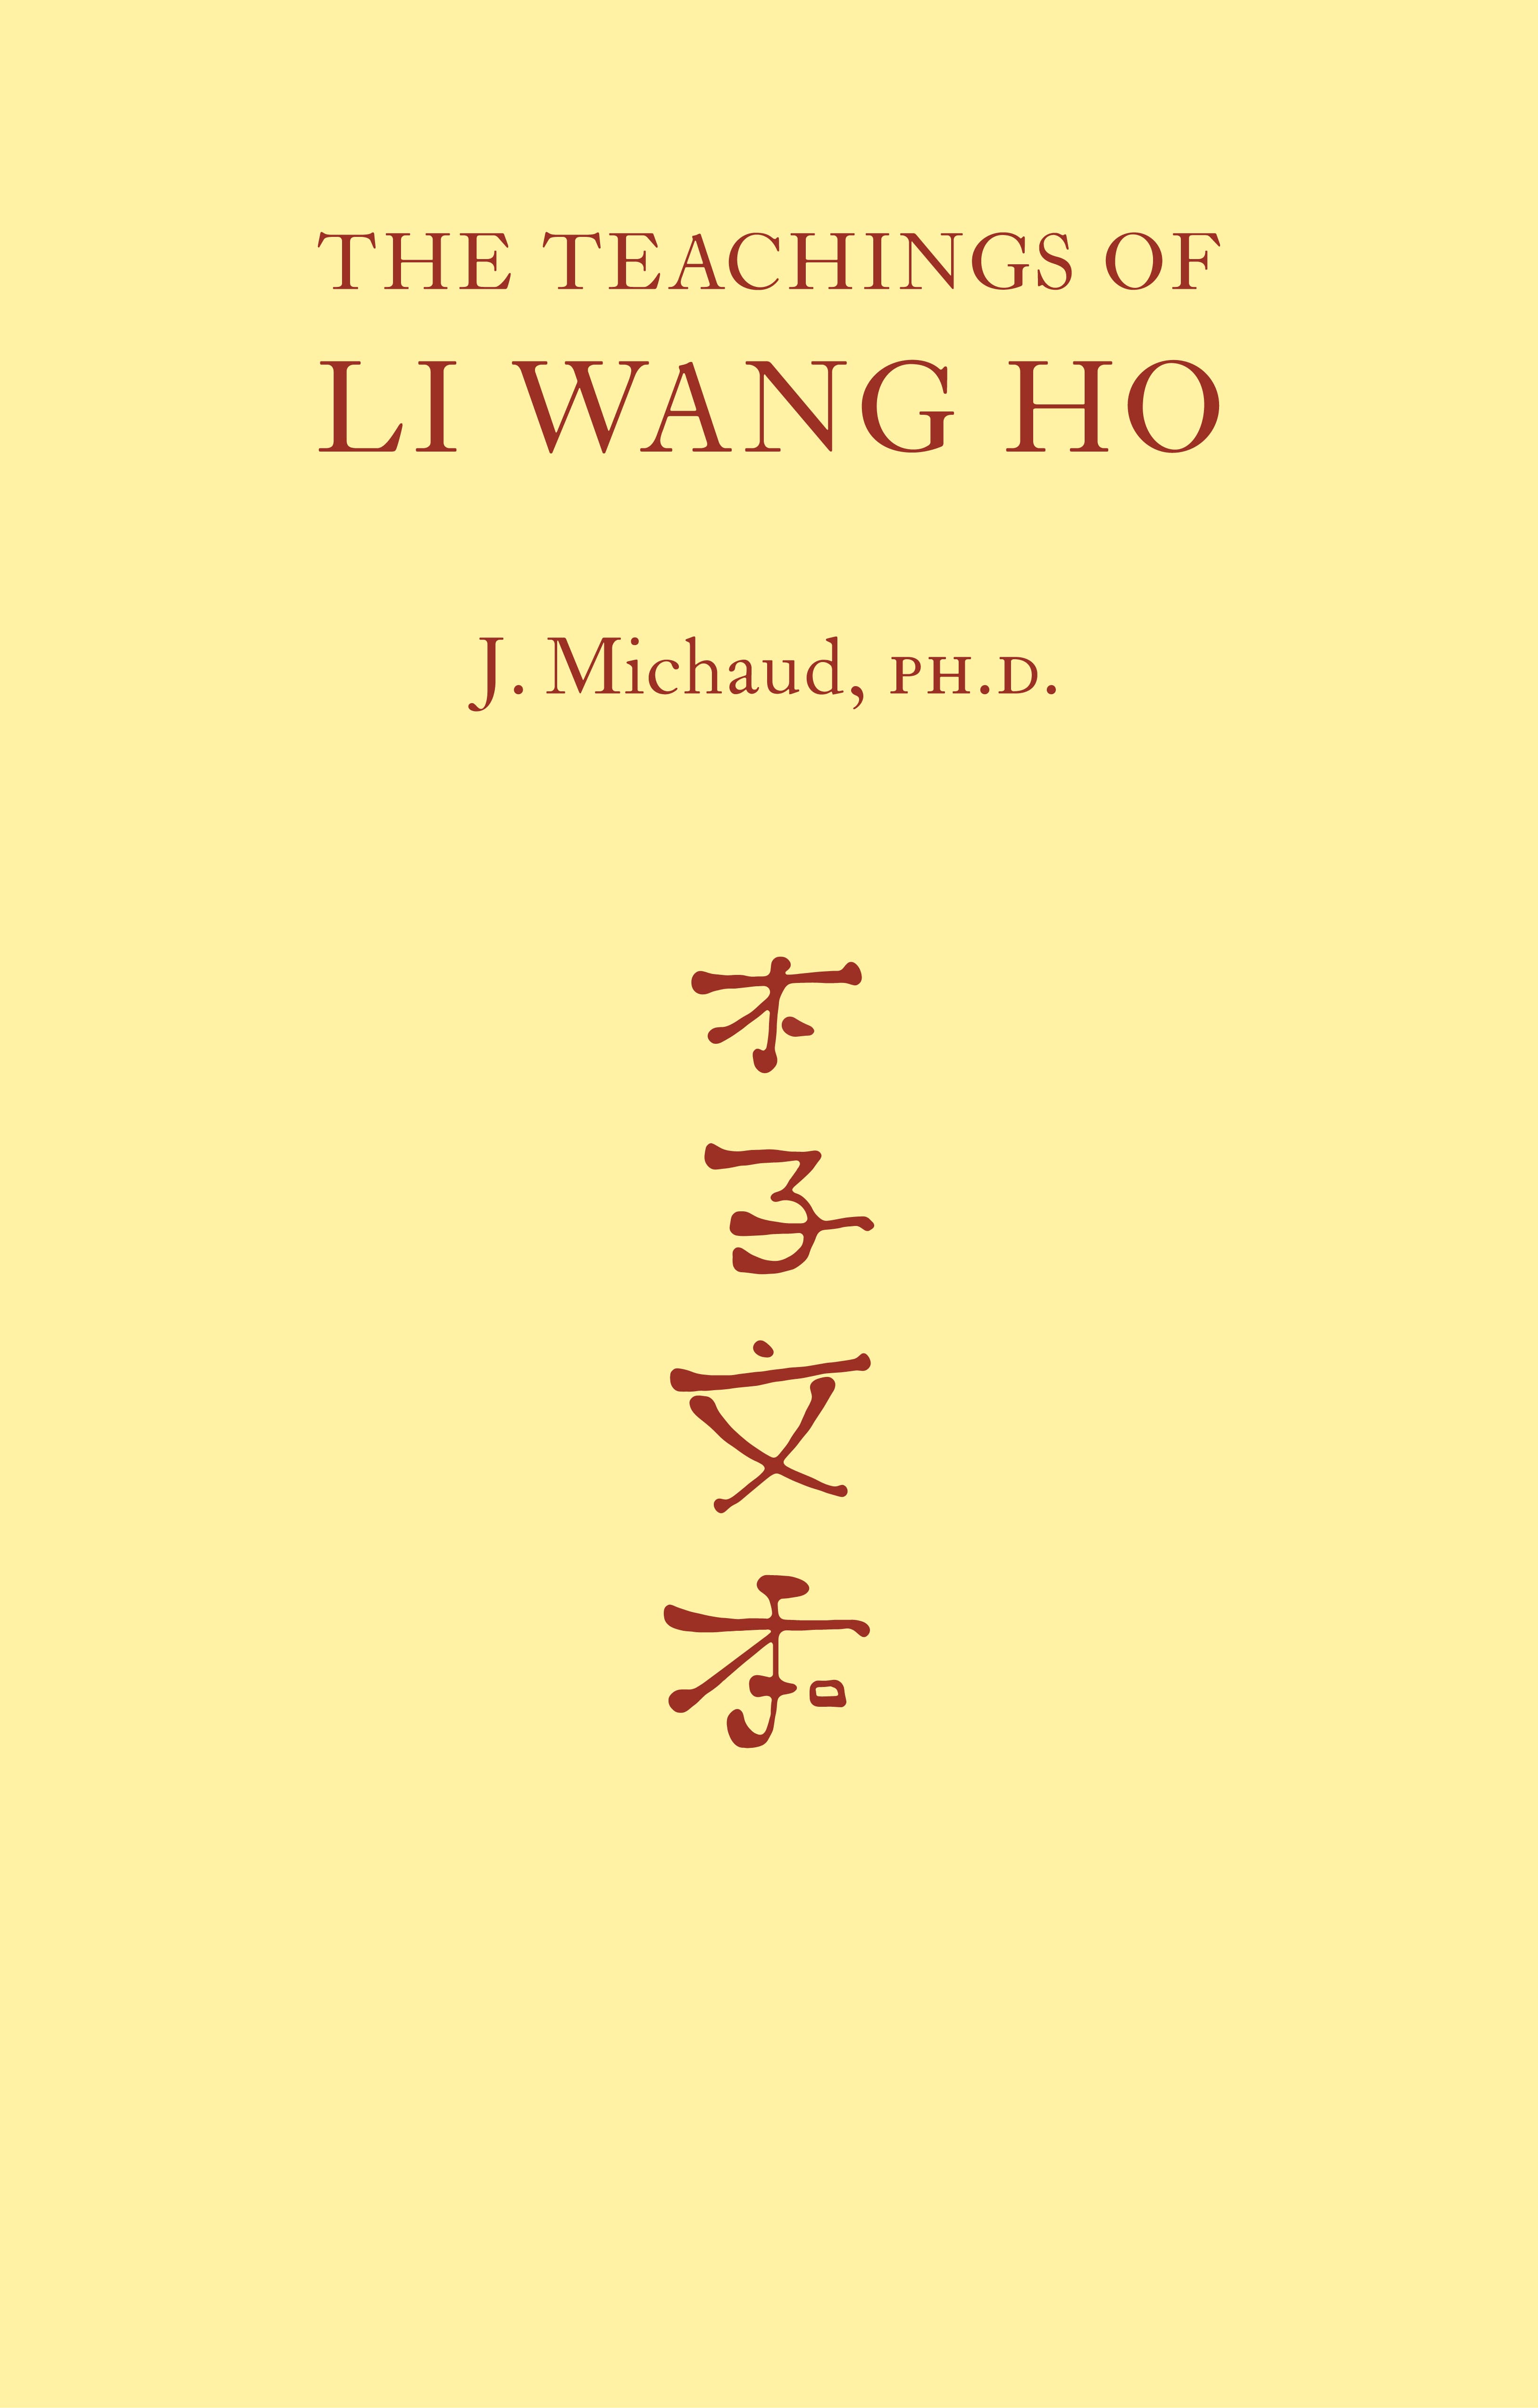 Cover of The Teachings of Li Wang Ho, title is followed by a string of Chinese characters underneath